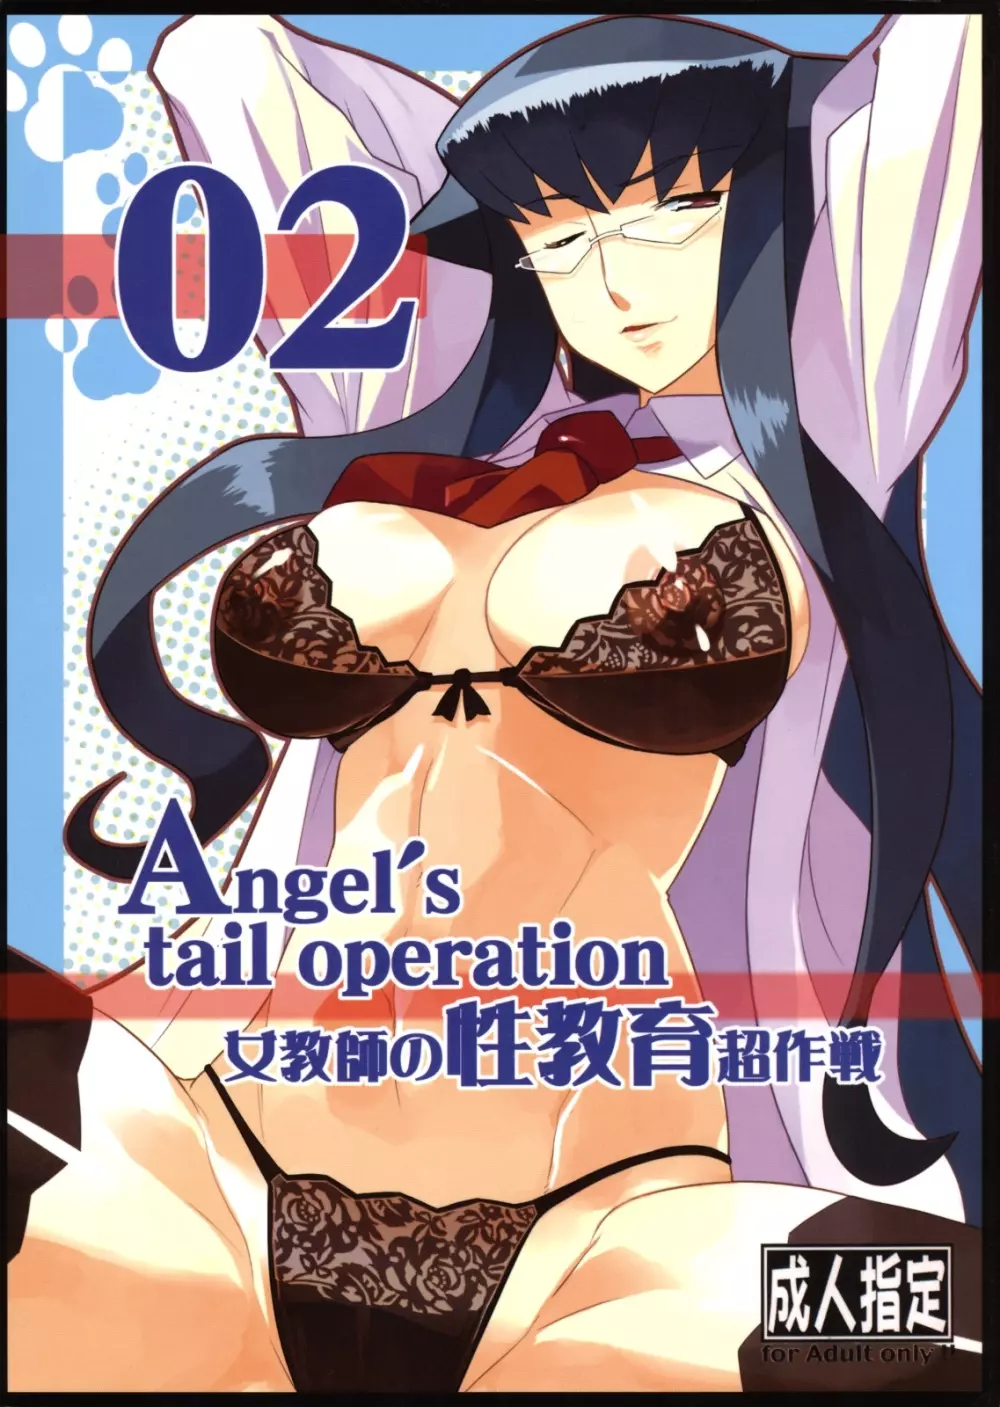 Angel’s tail operation 02 女教師の性教育超作戦 1ページ